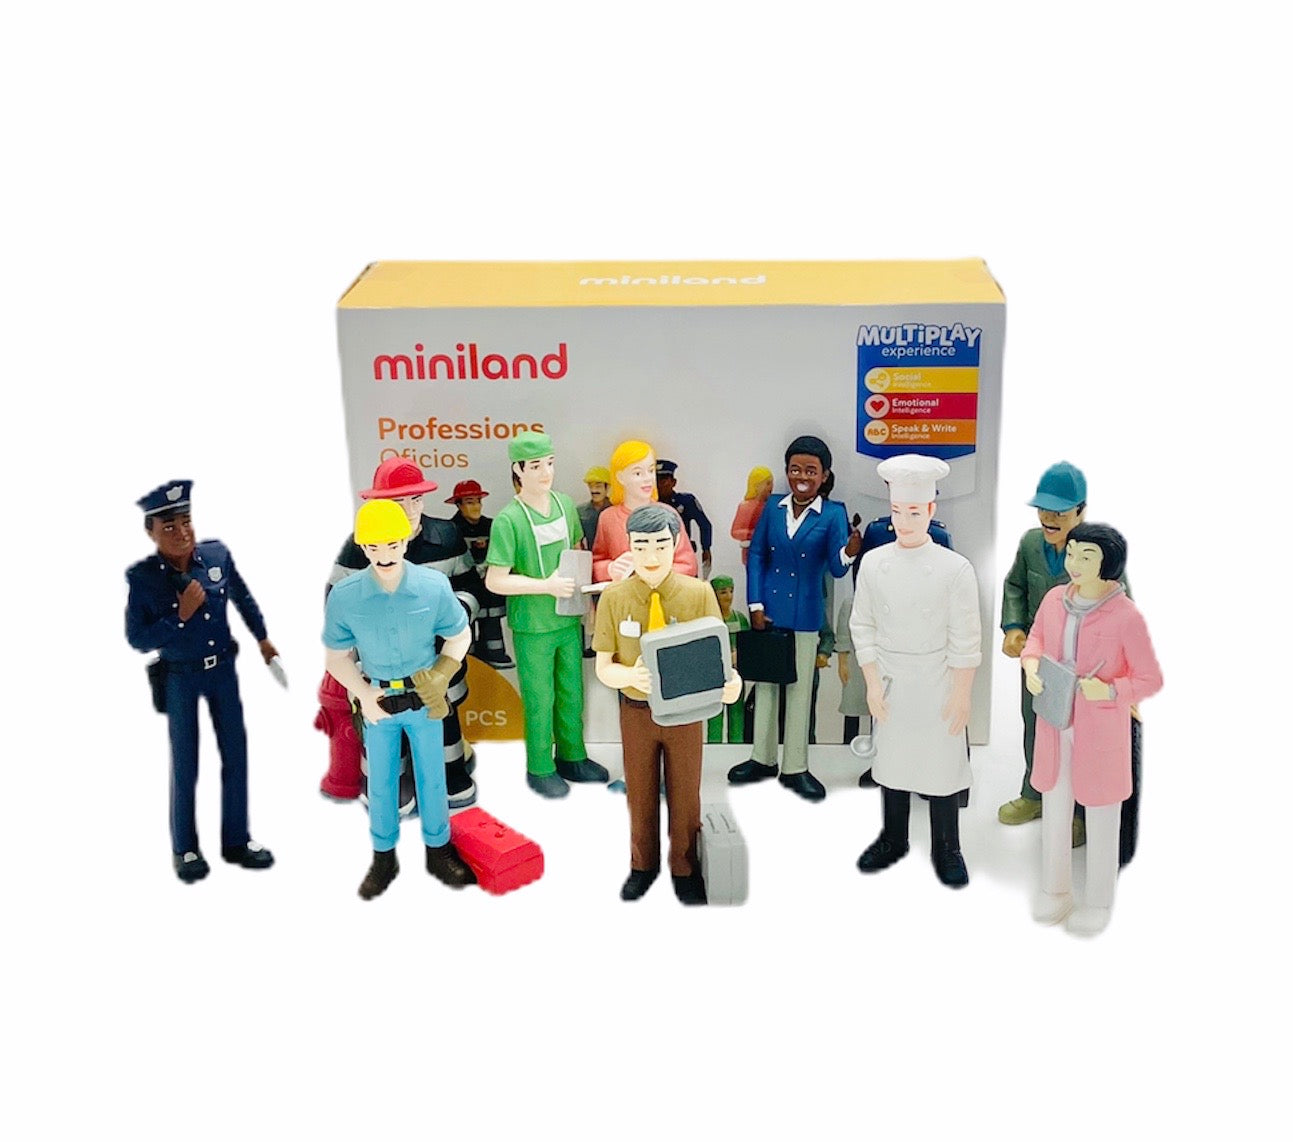 Miniland Figures - Professions on display with figures in front of box